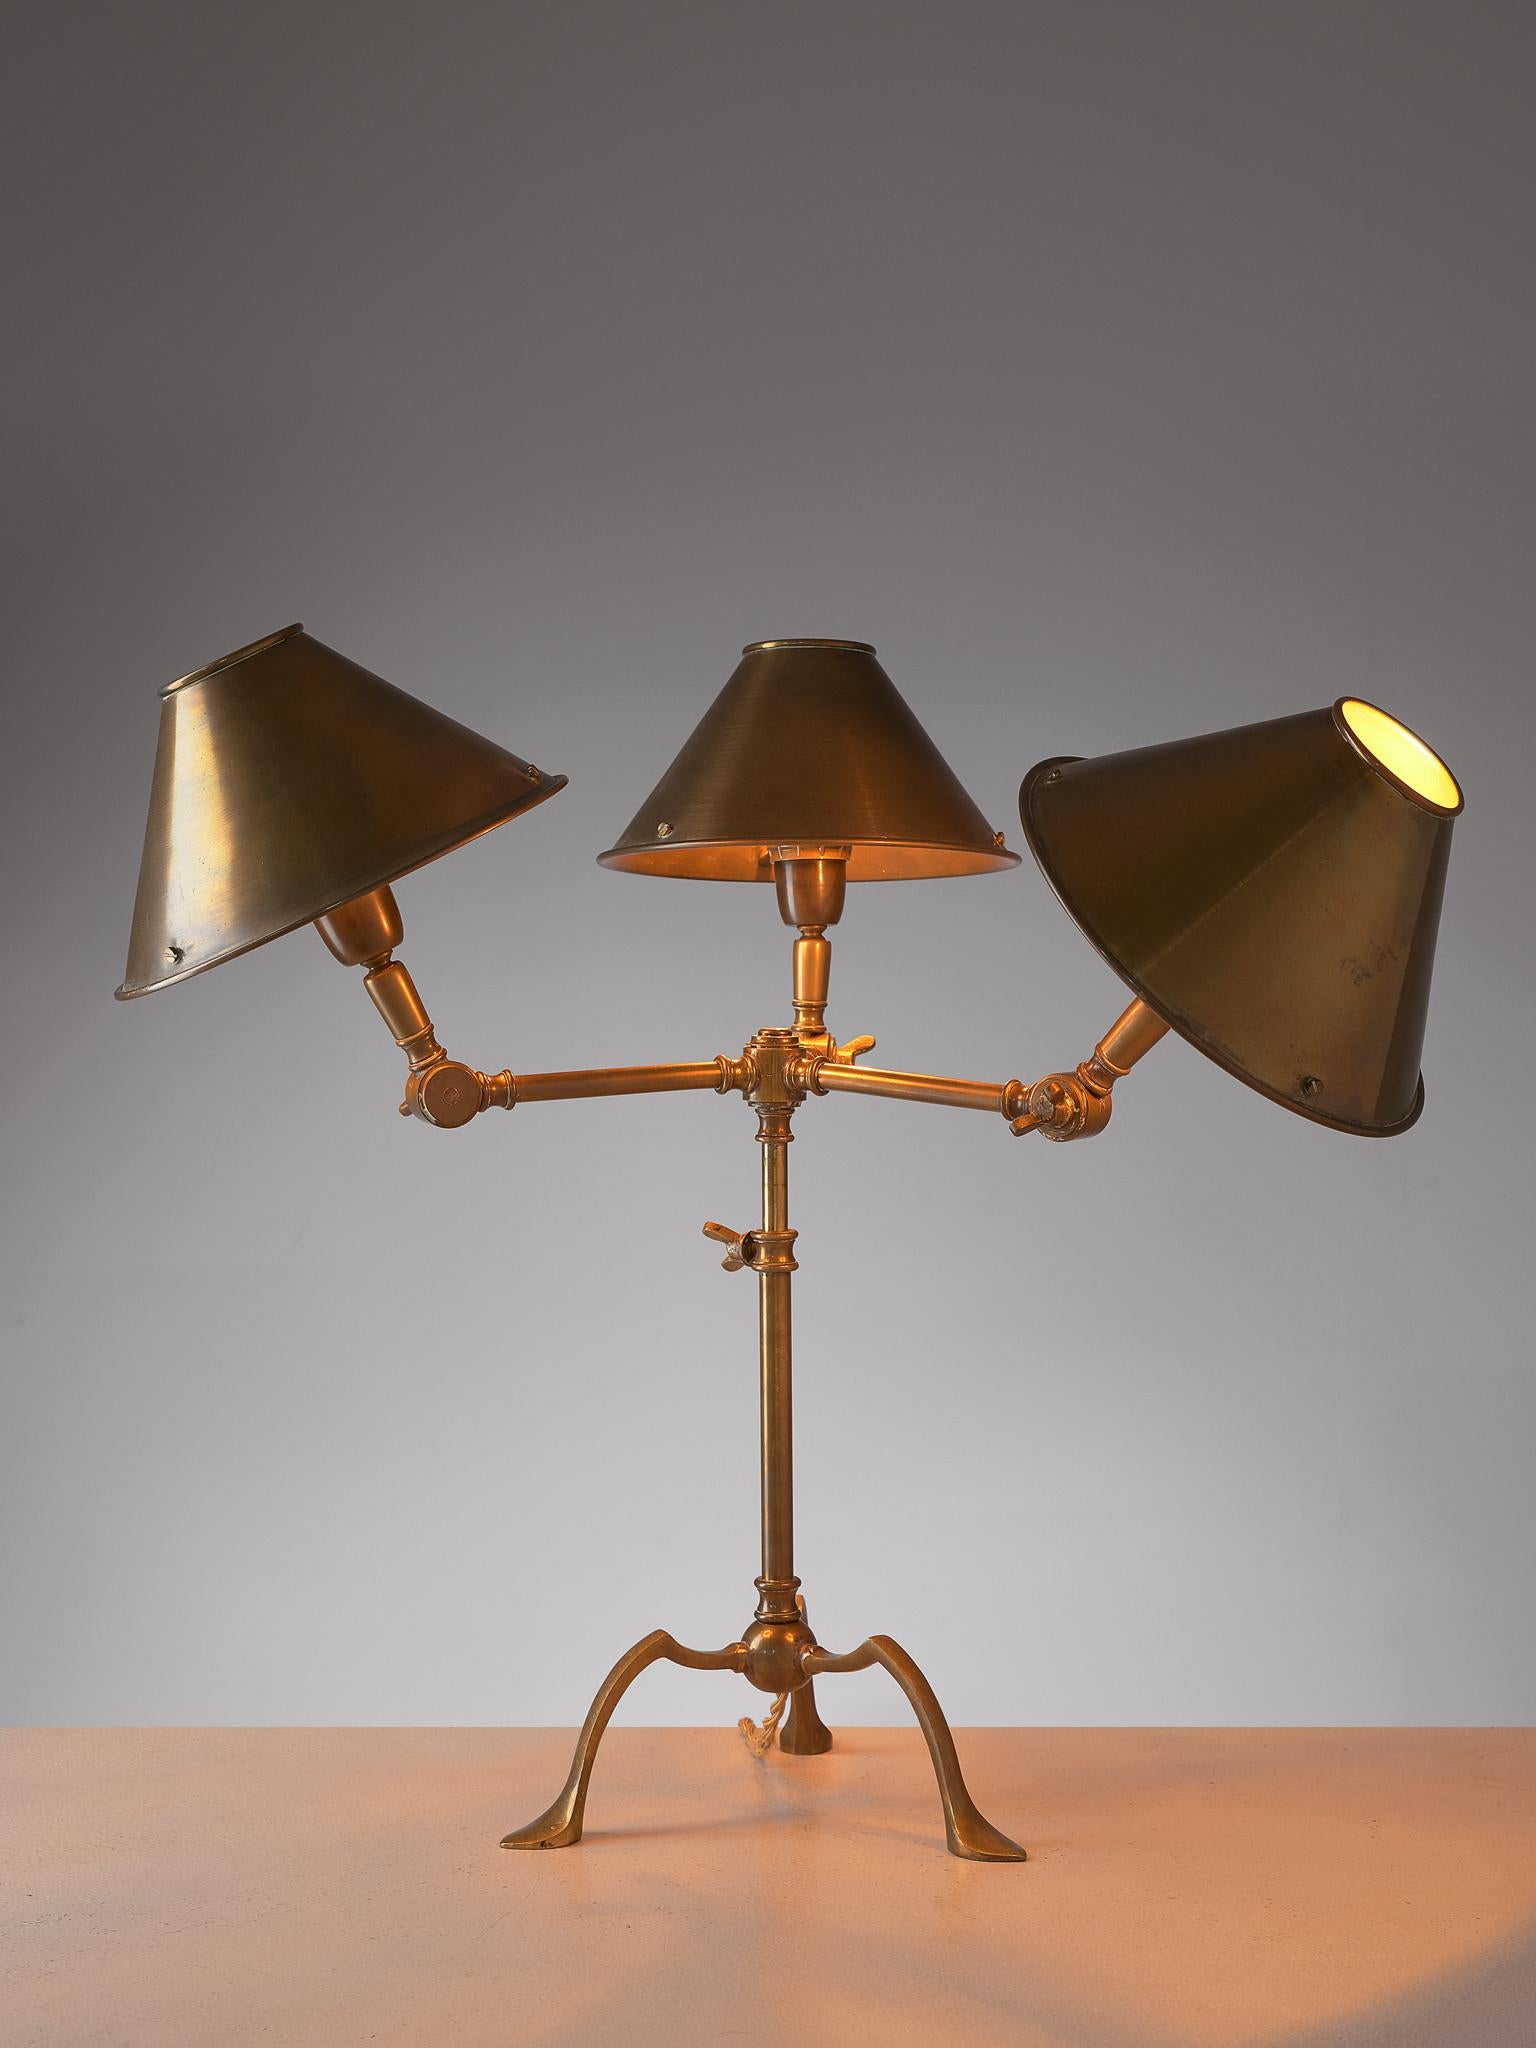 Table light, brass, Italy, 1960s

Playful desk light, completely executed in brass. The lamp features a tripod foot and three arms with the shade. The arms are adjustable in any direction, which results in a versatile and almost comical piece.

